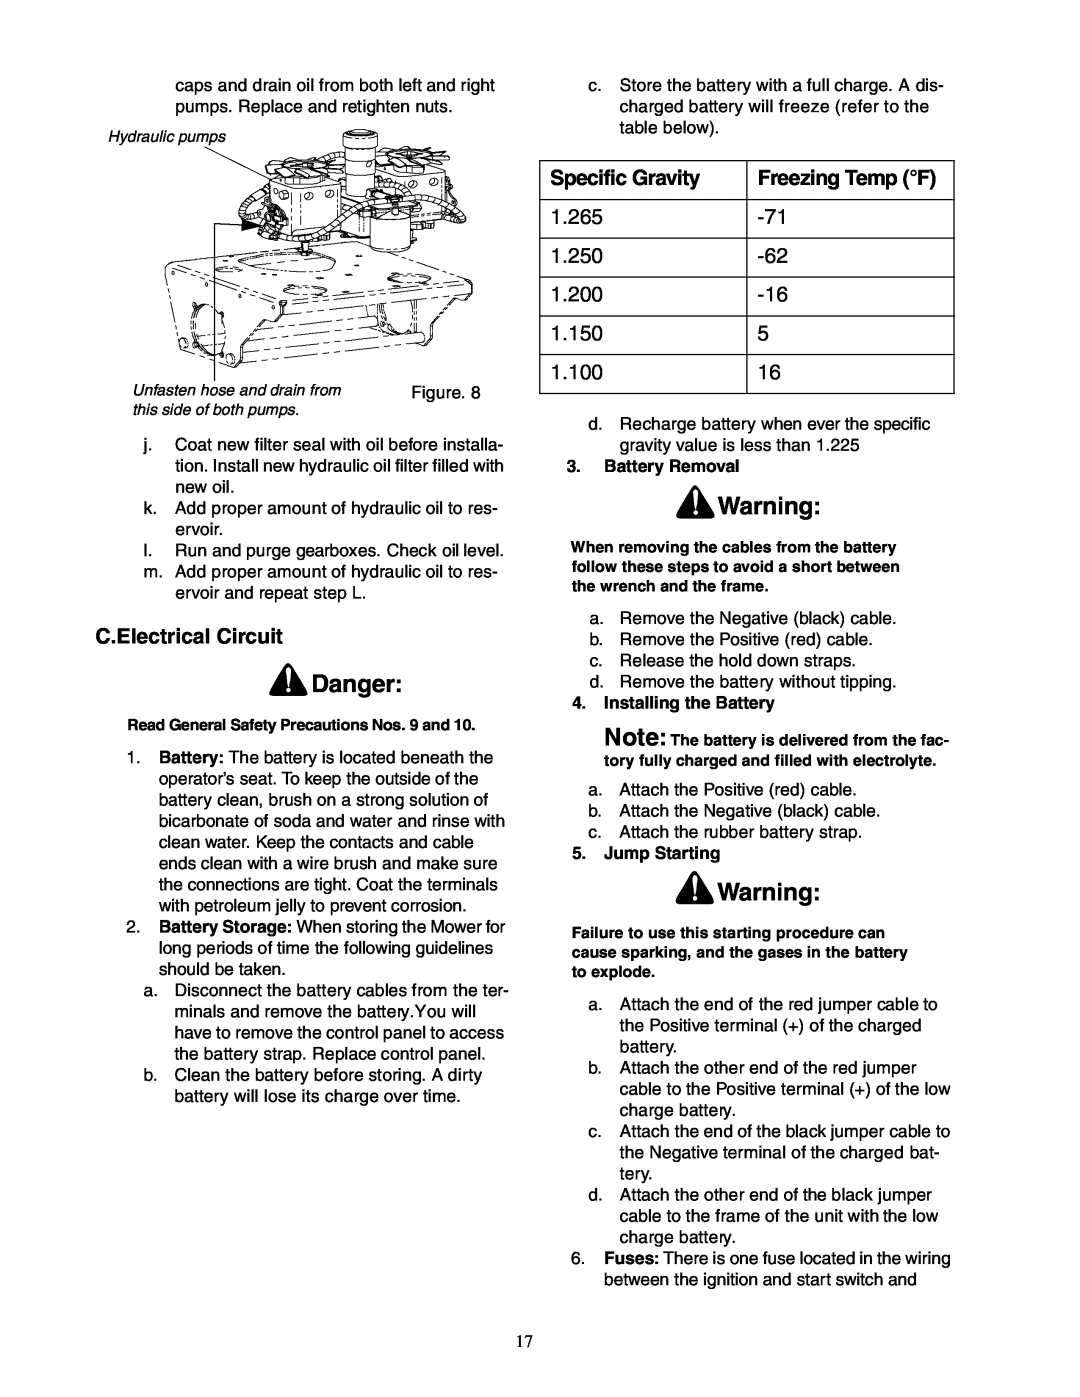 Cub Cadet Z - Wing 48 service manual Danger, C.Electrical Circuit, Specific Gravity, Freezing Temp F 